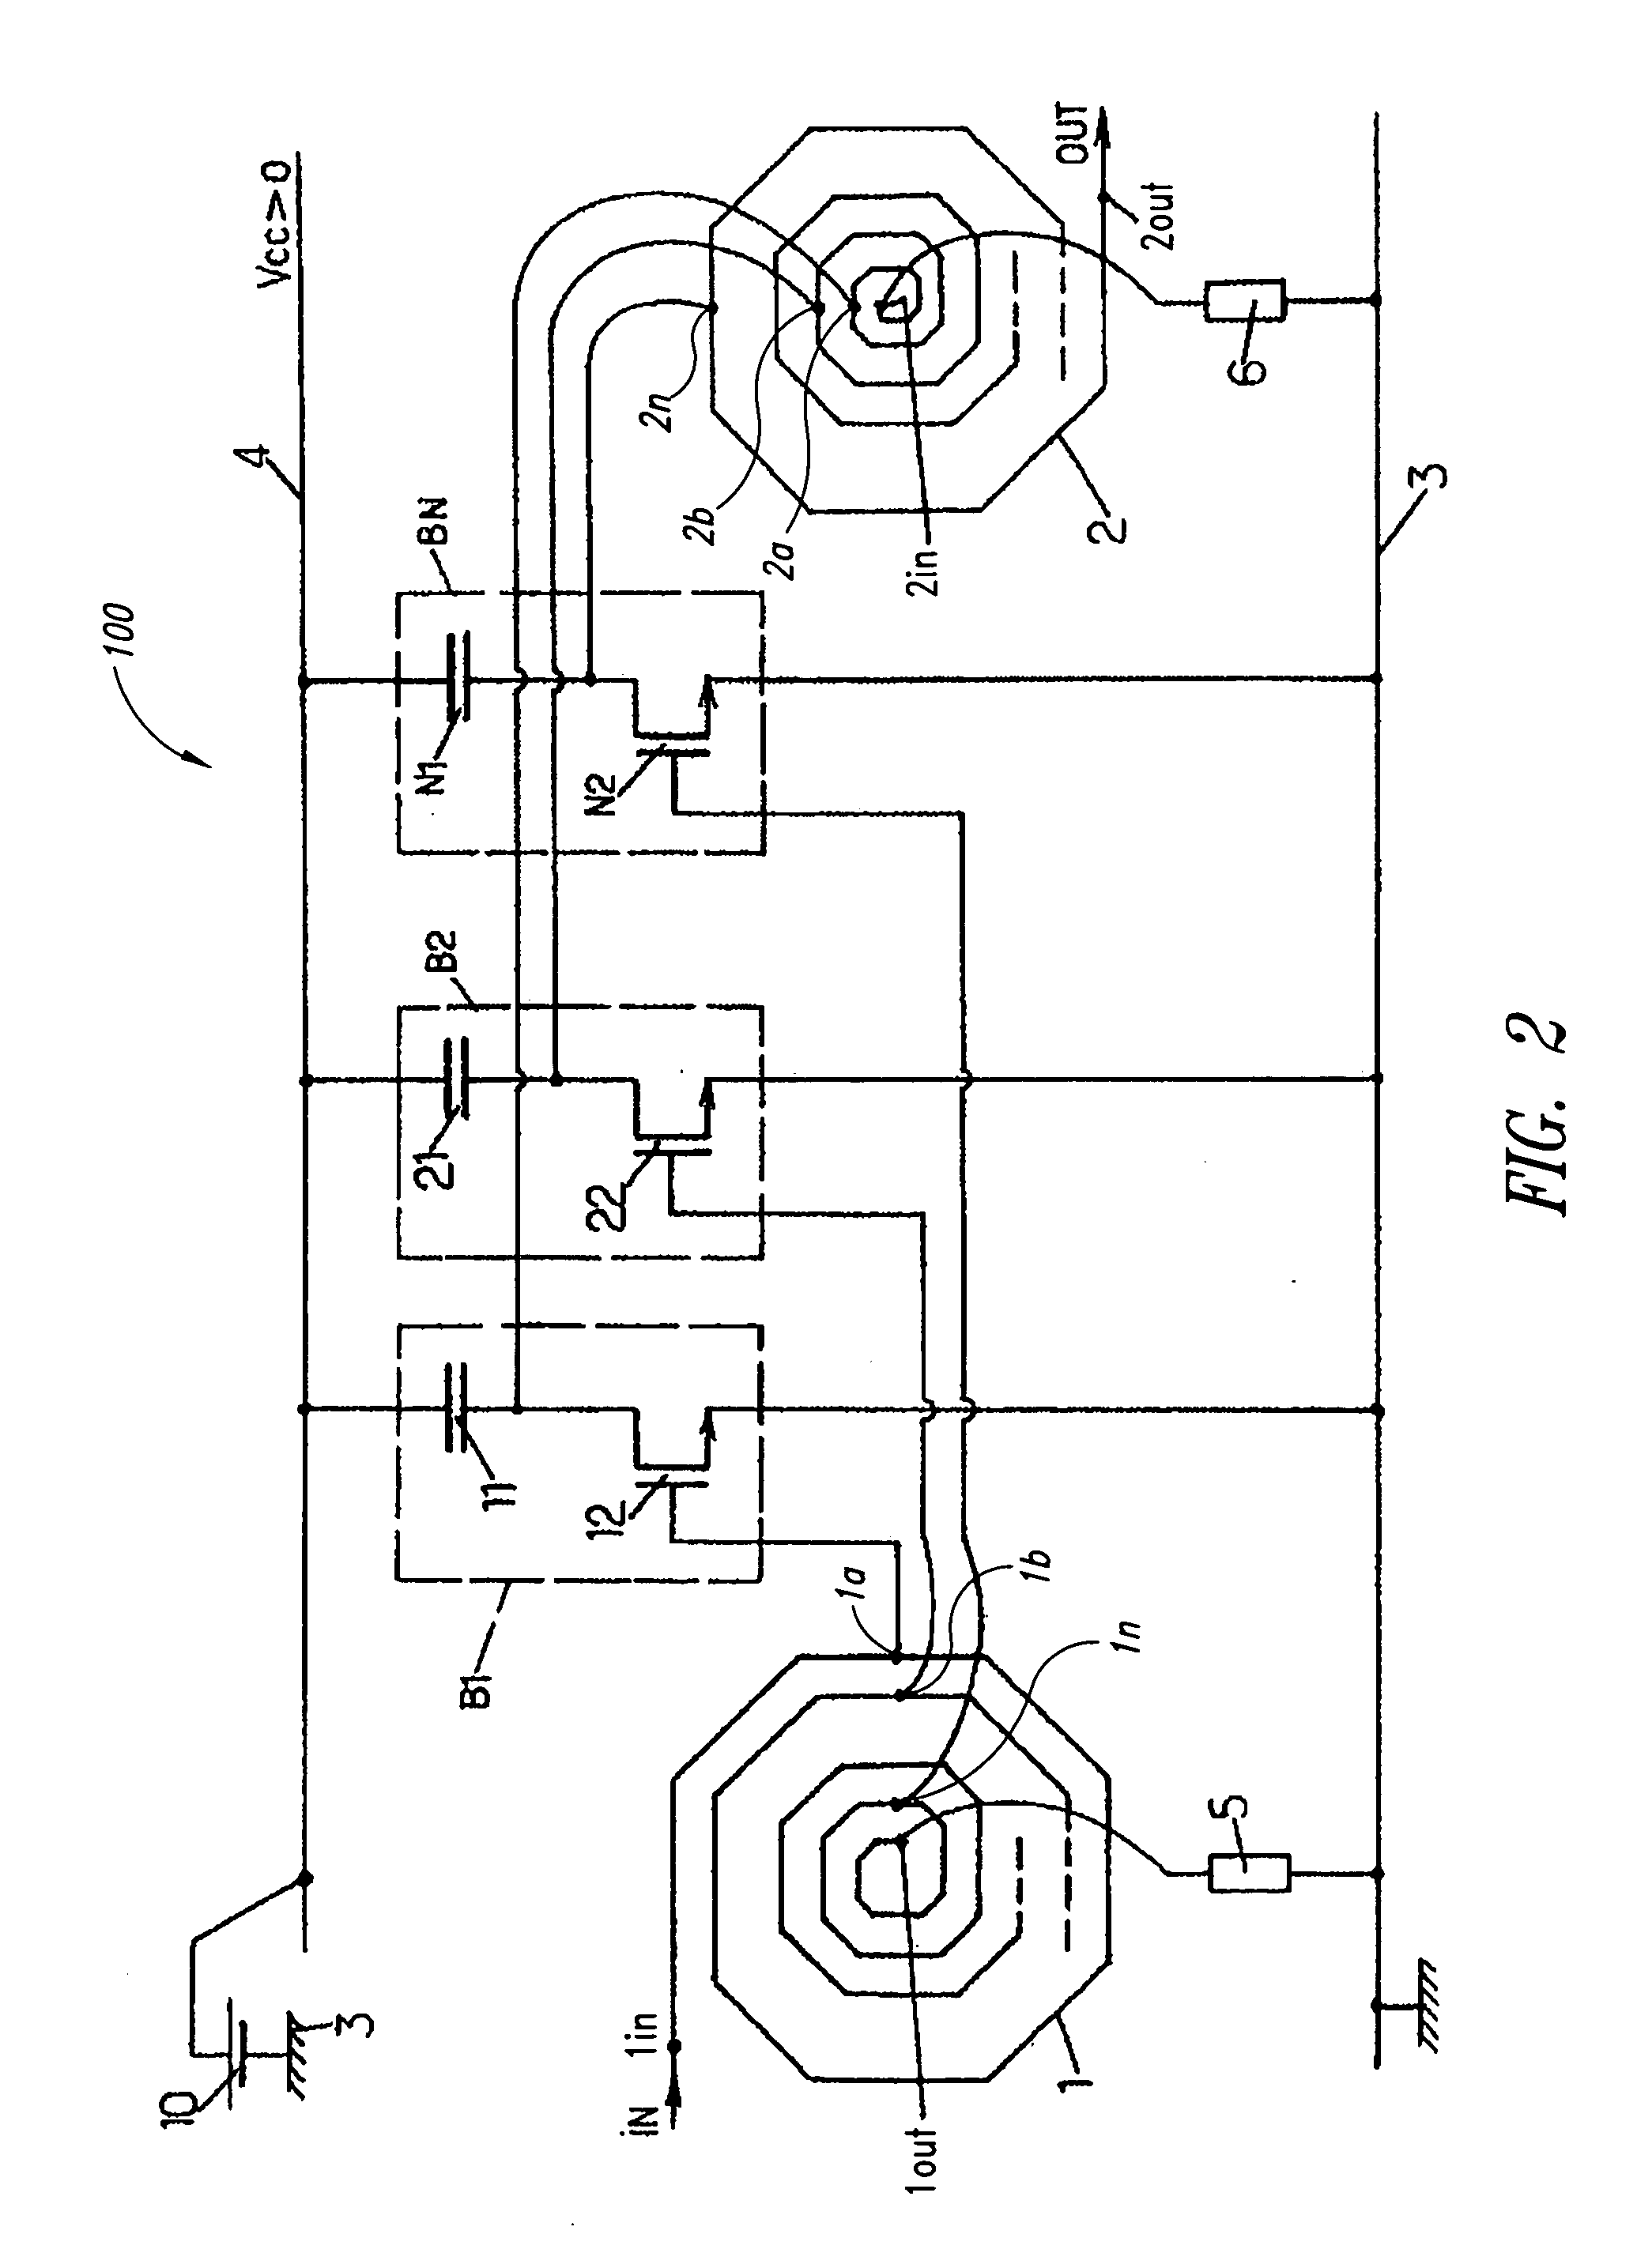 Electronic signal amplifier and method and article for determining the gain of such an amplifier